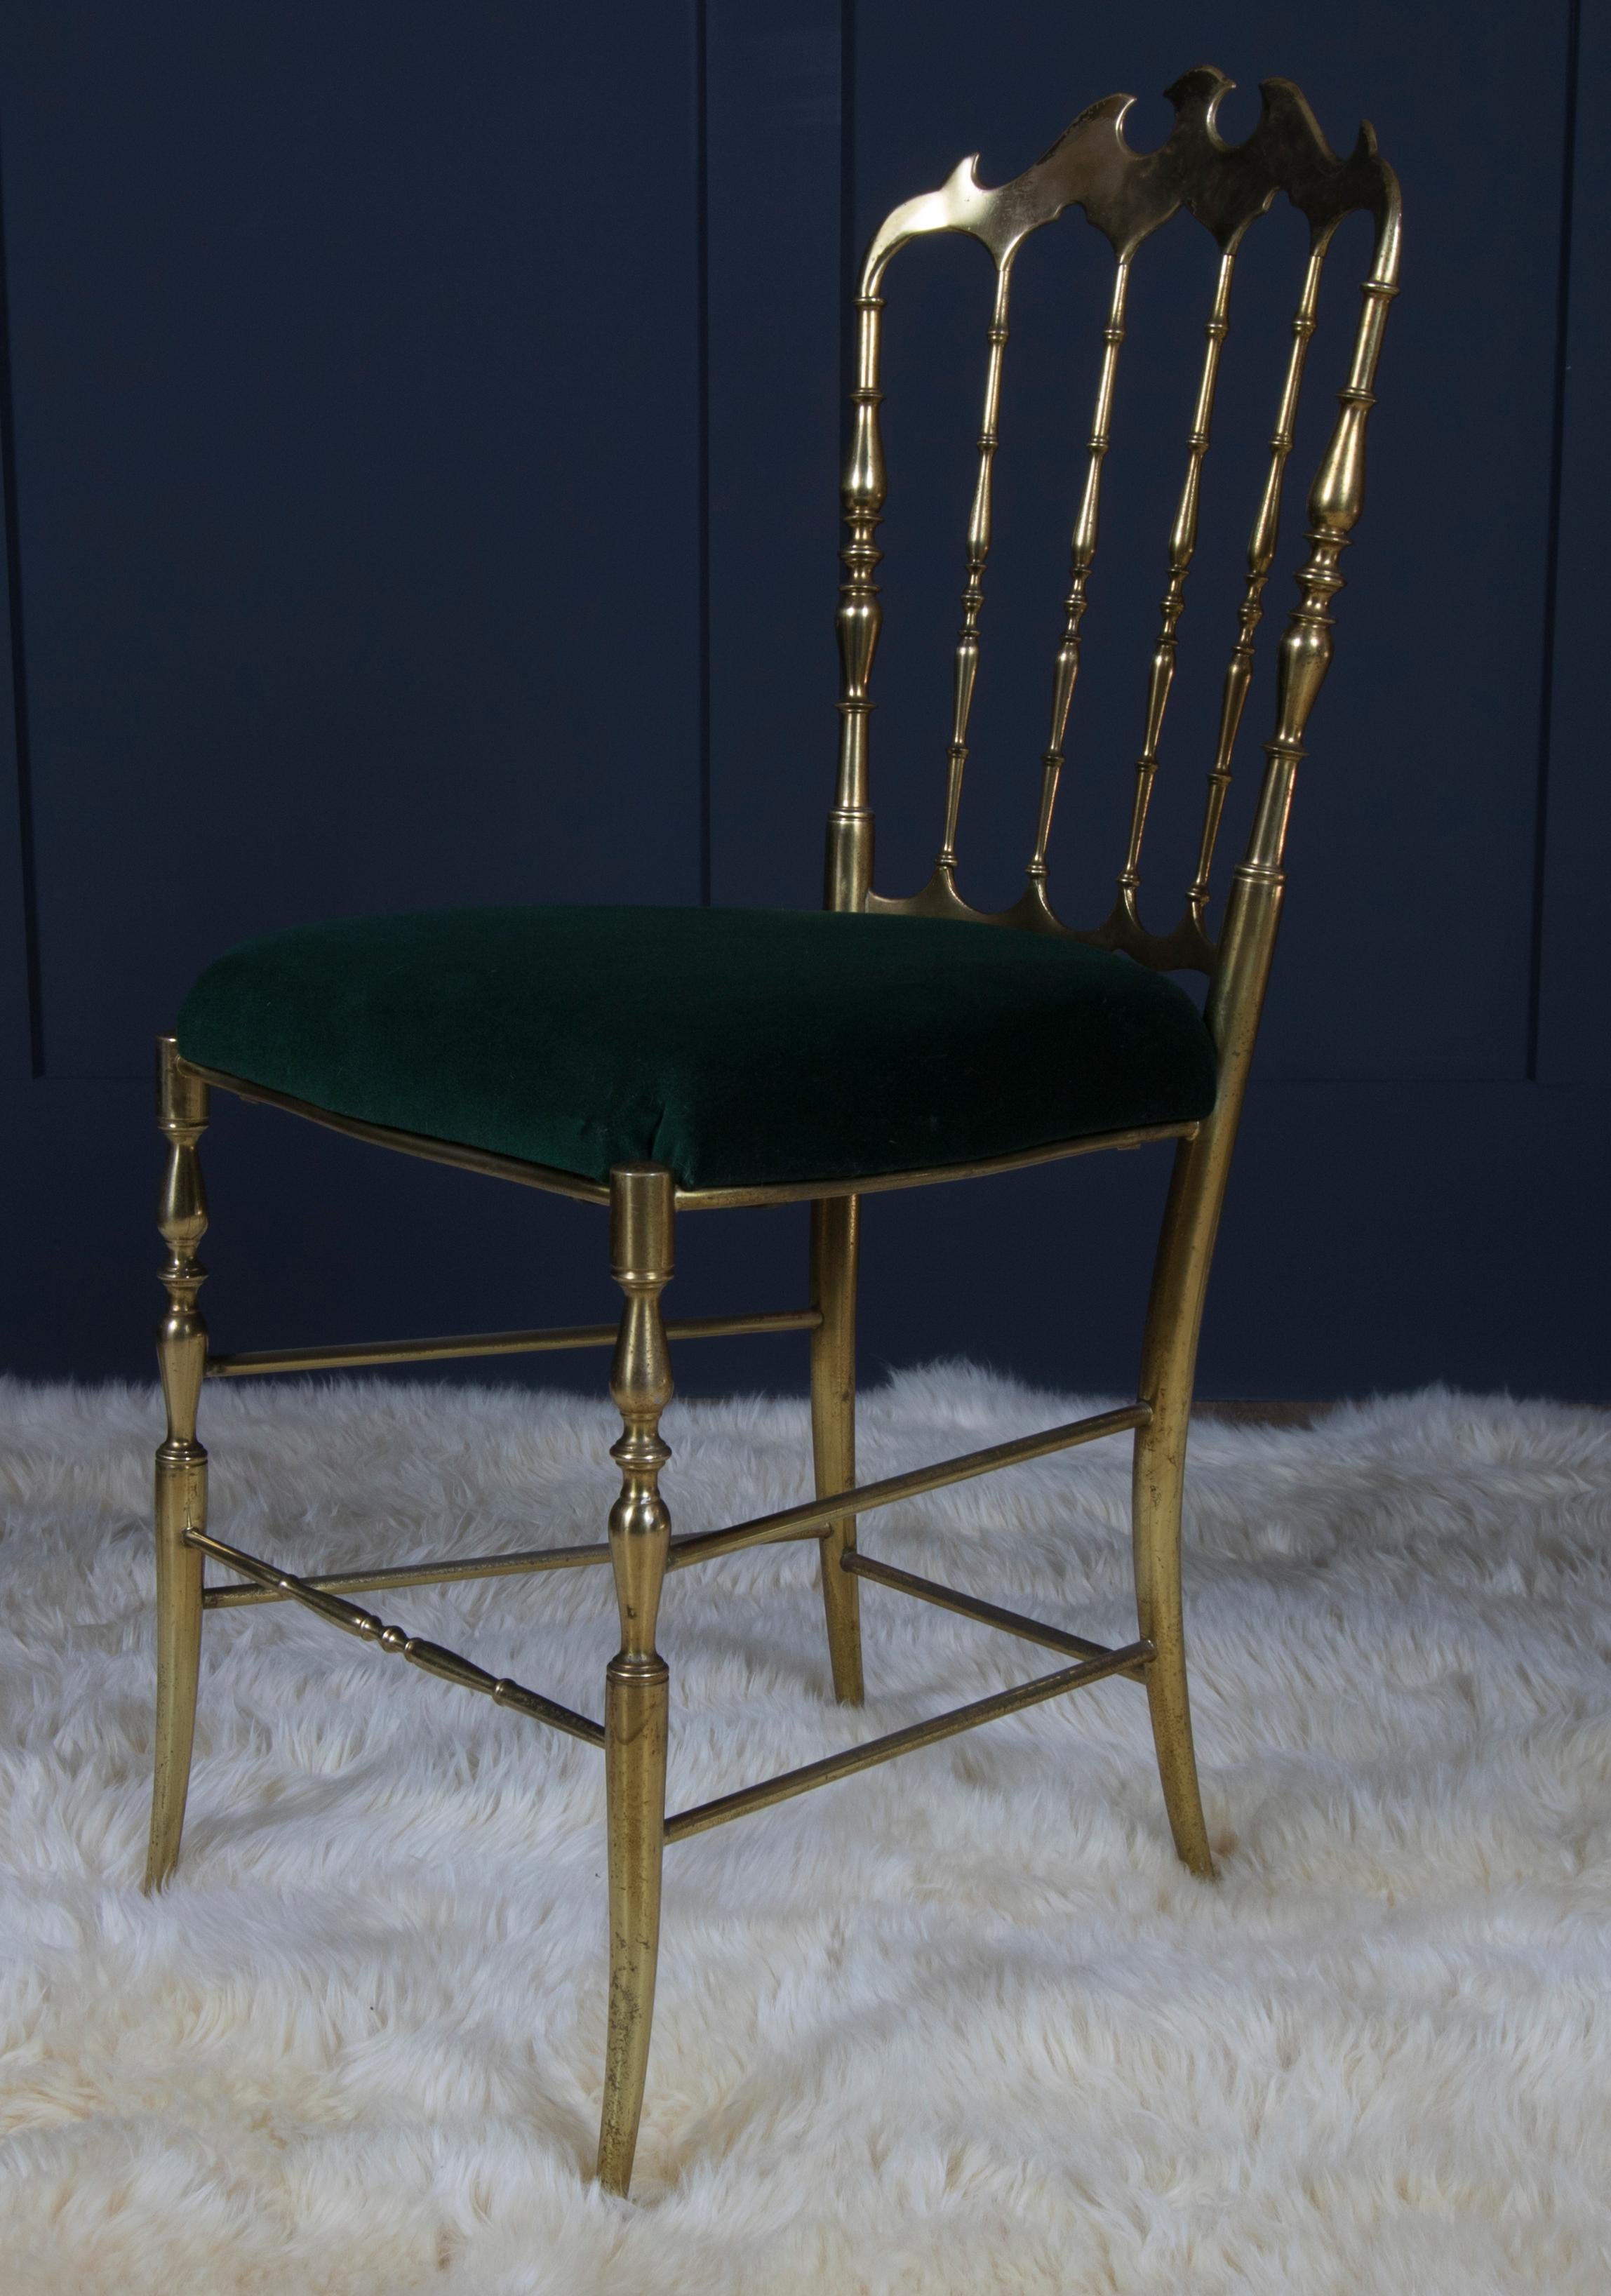 20th Century Midcentury Chiavari Brass Chairs Set of Six with Forest Green Seatpads